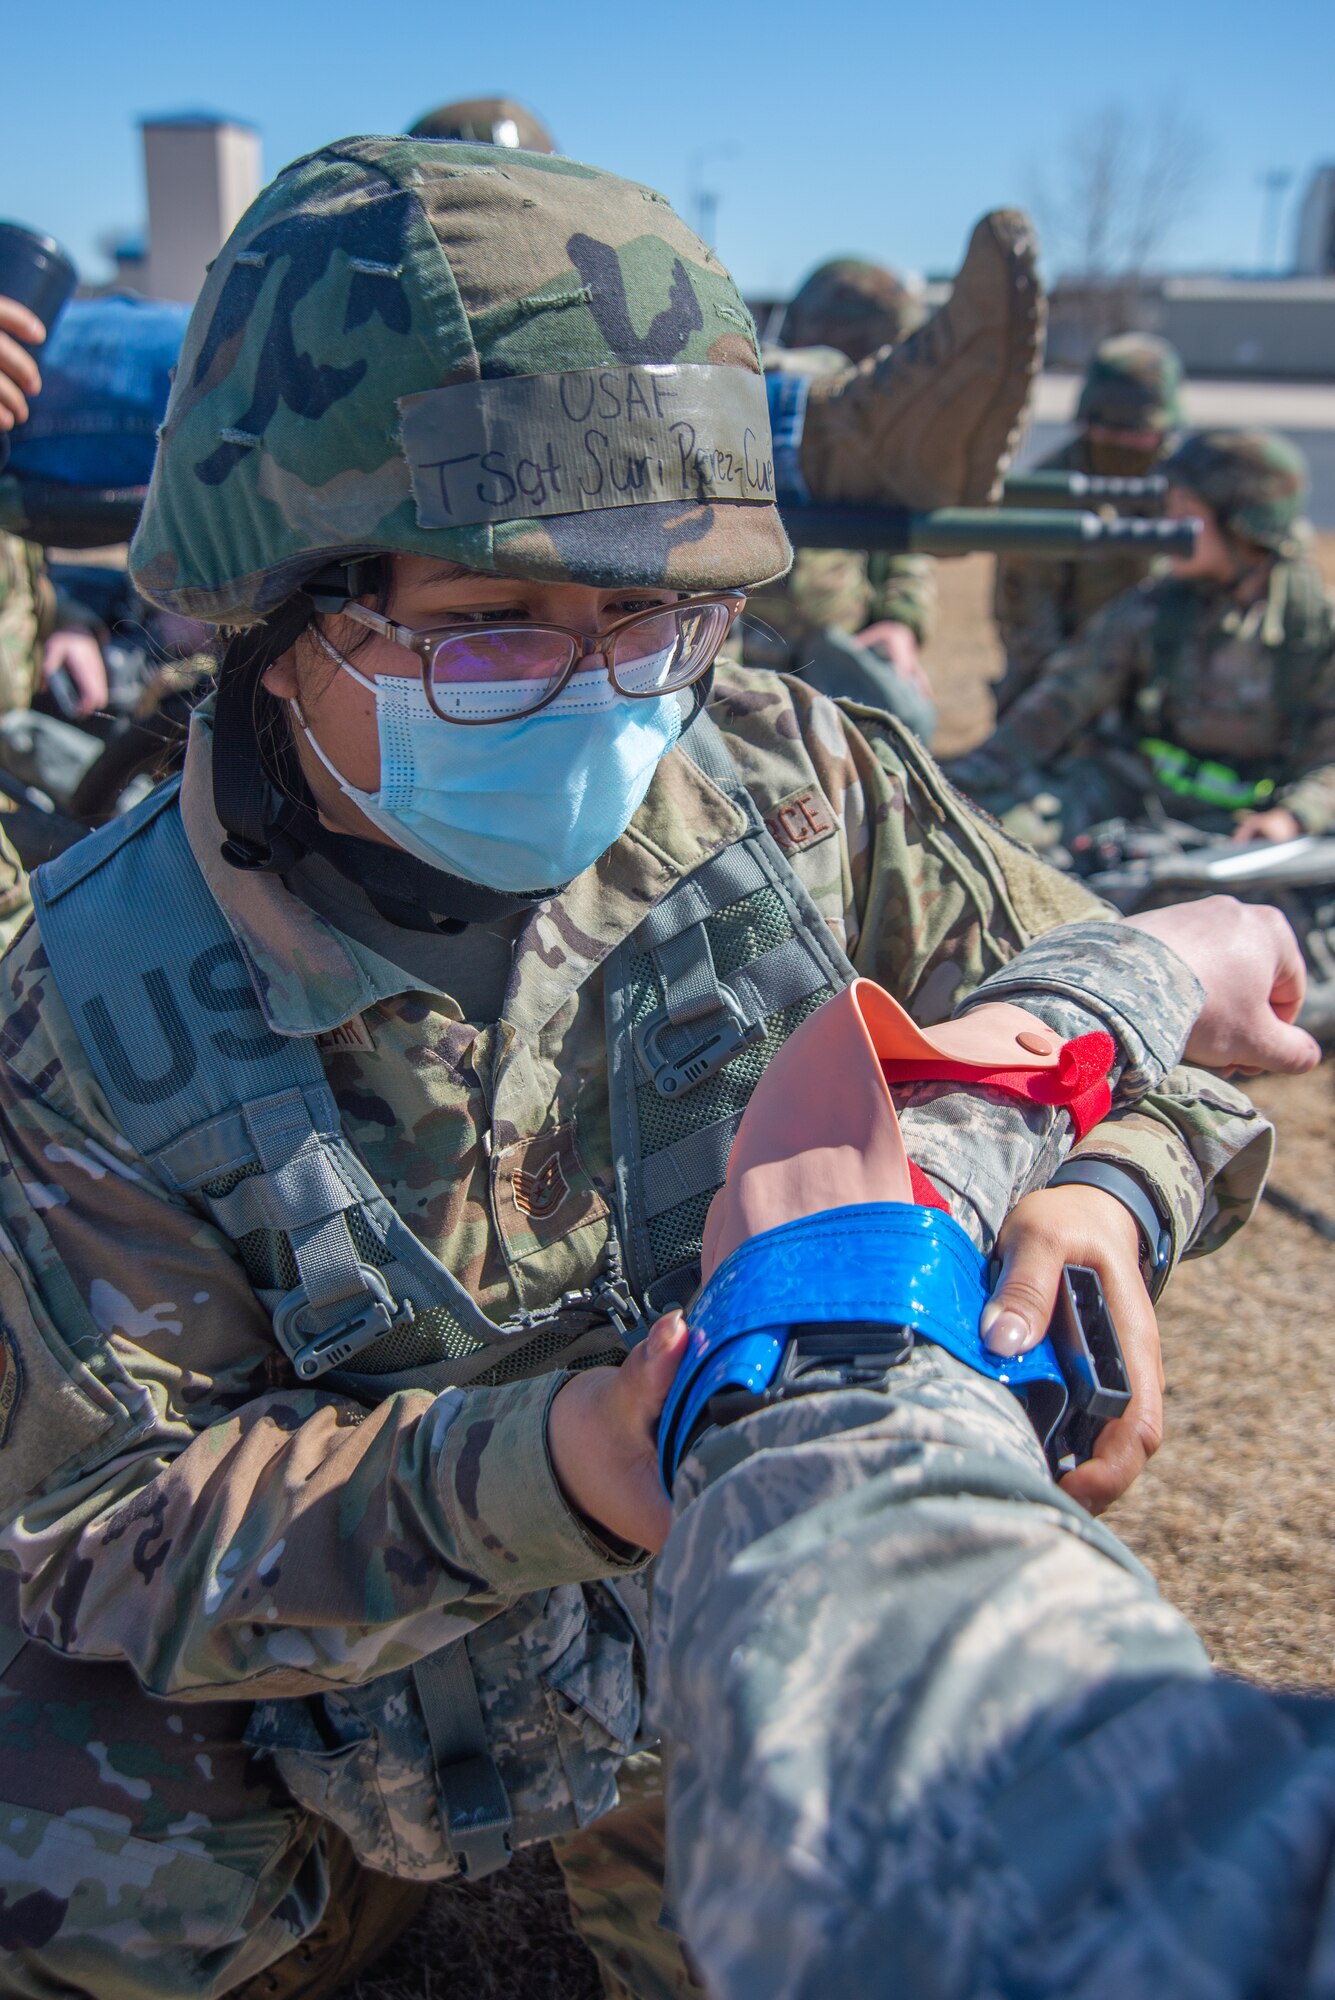 Airman tends to a synthetic arm injury.